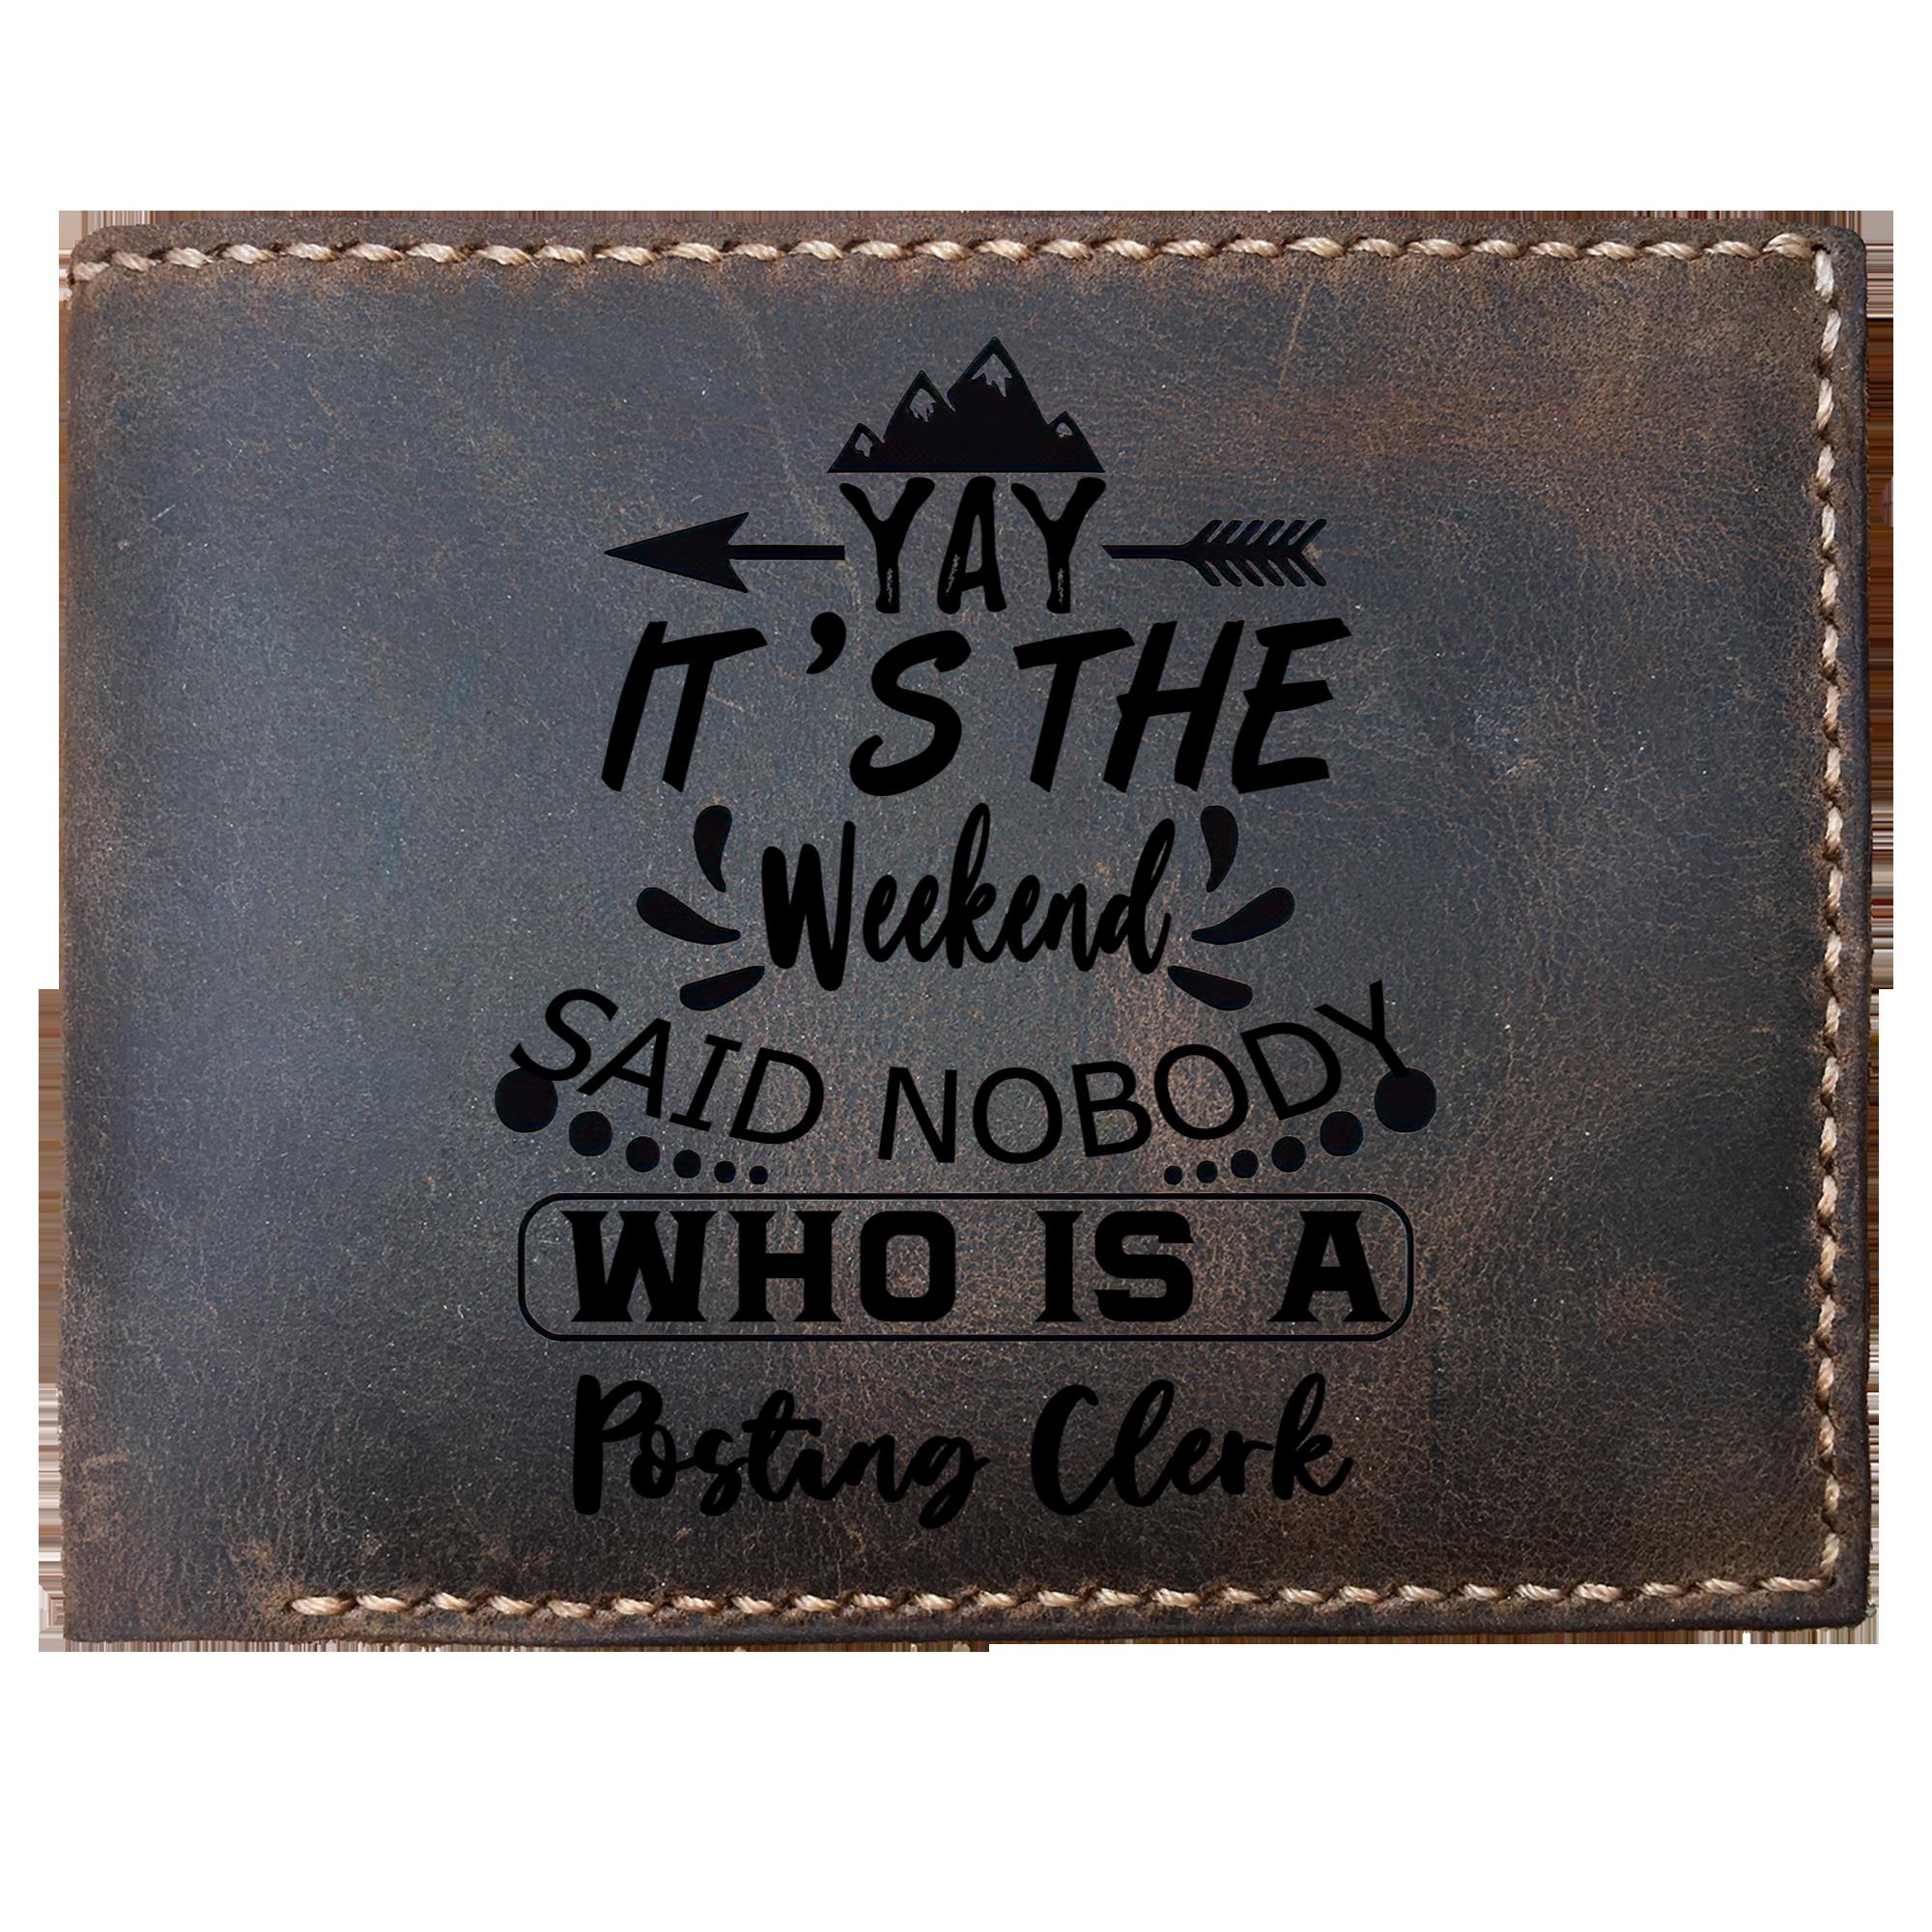 Skitongifts Funny Custom Laser Engraved Bifold Leather Wallet For Men, It's The Weekend Said Nobody Who Is A Posting Clerk, Father's Day Gifts